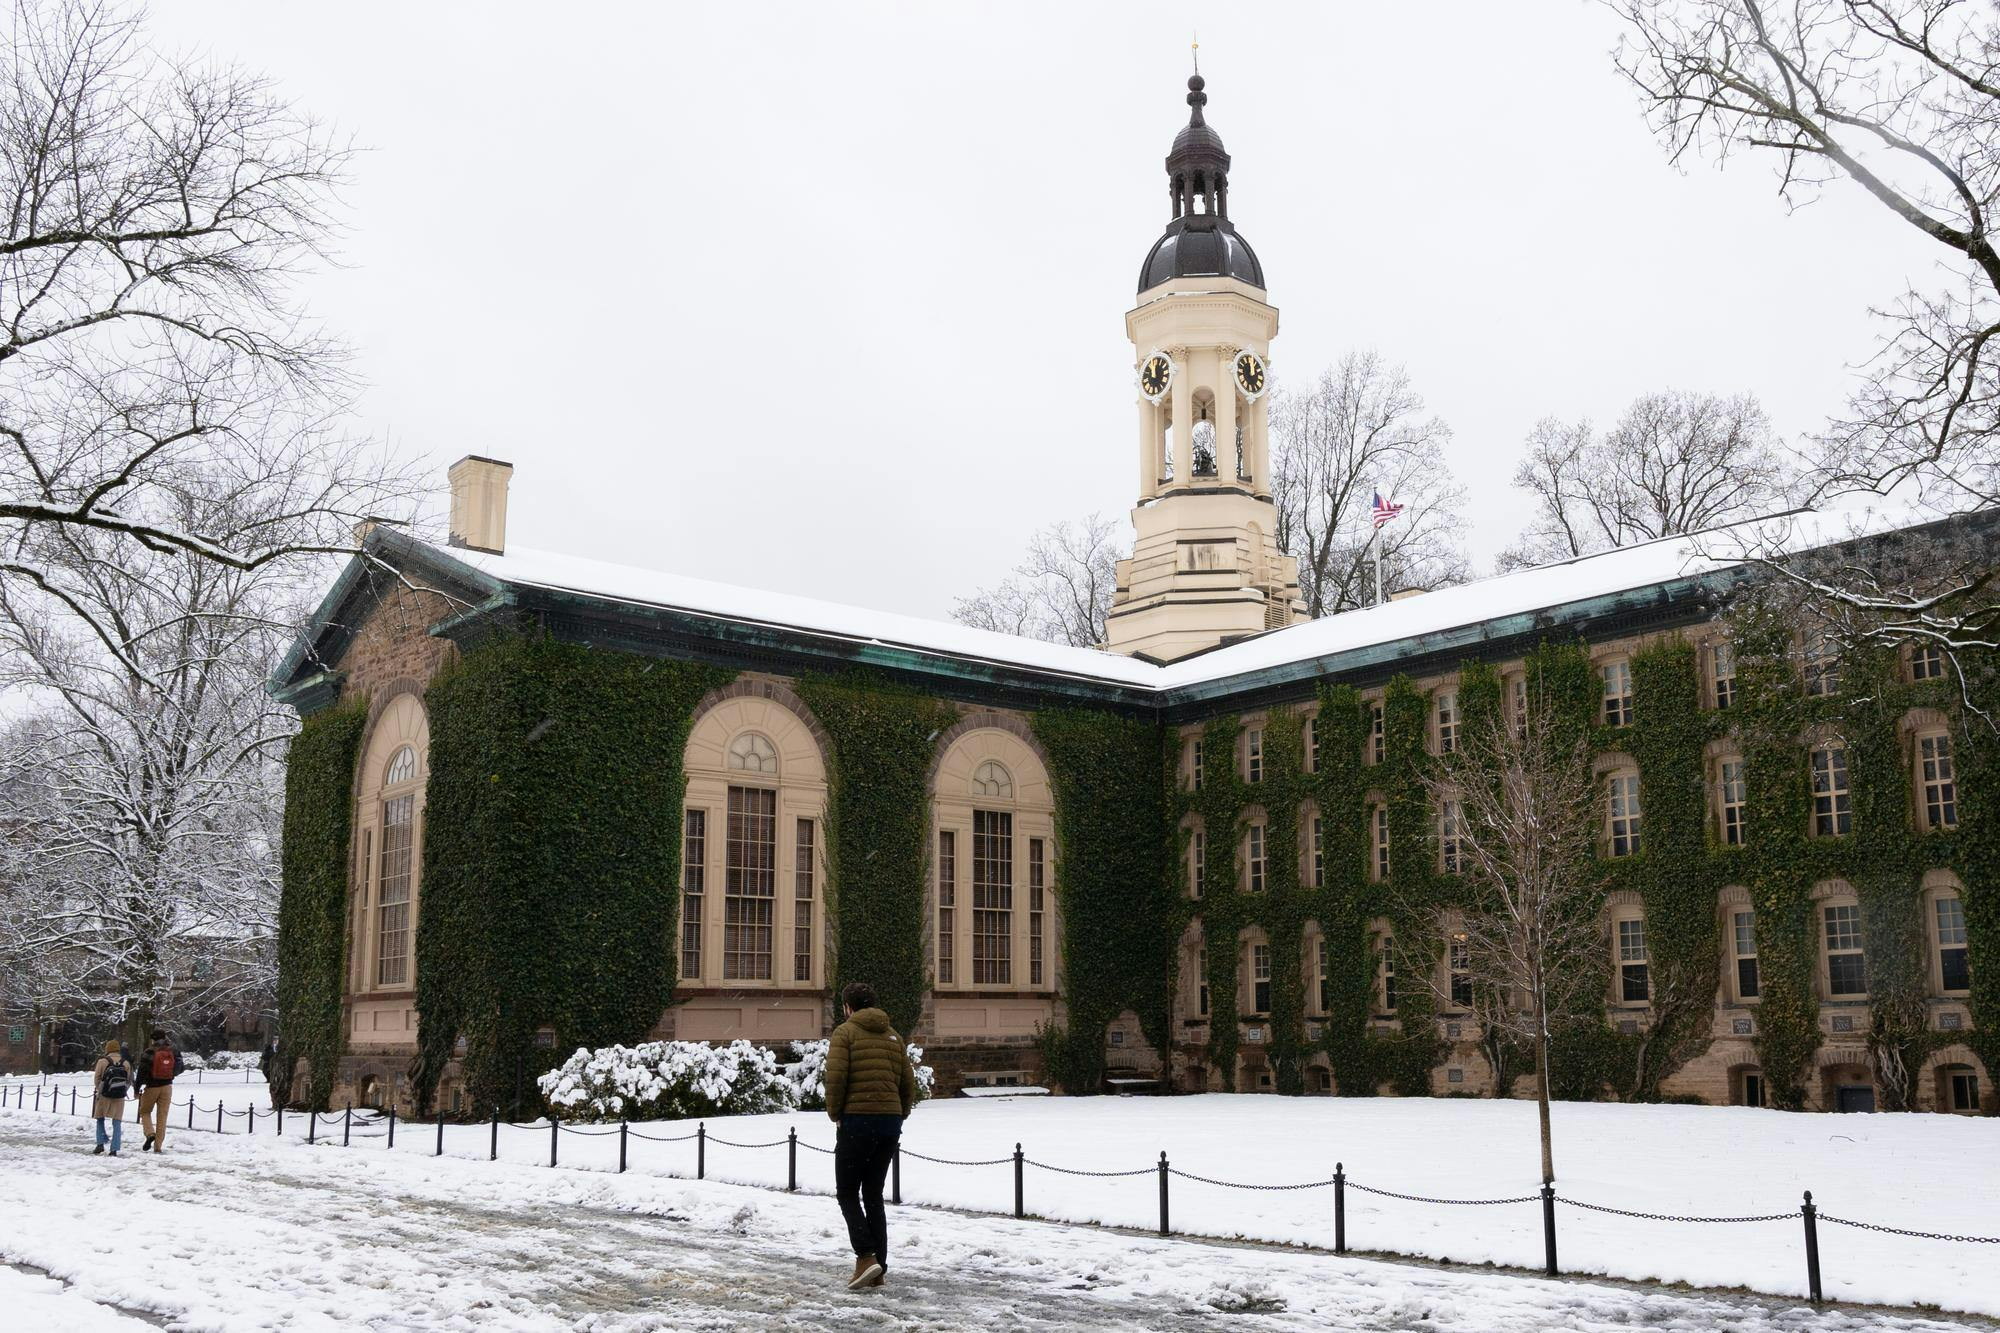 An ivy-covered building covered in snow on a winter day, with three students walking to the left.